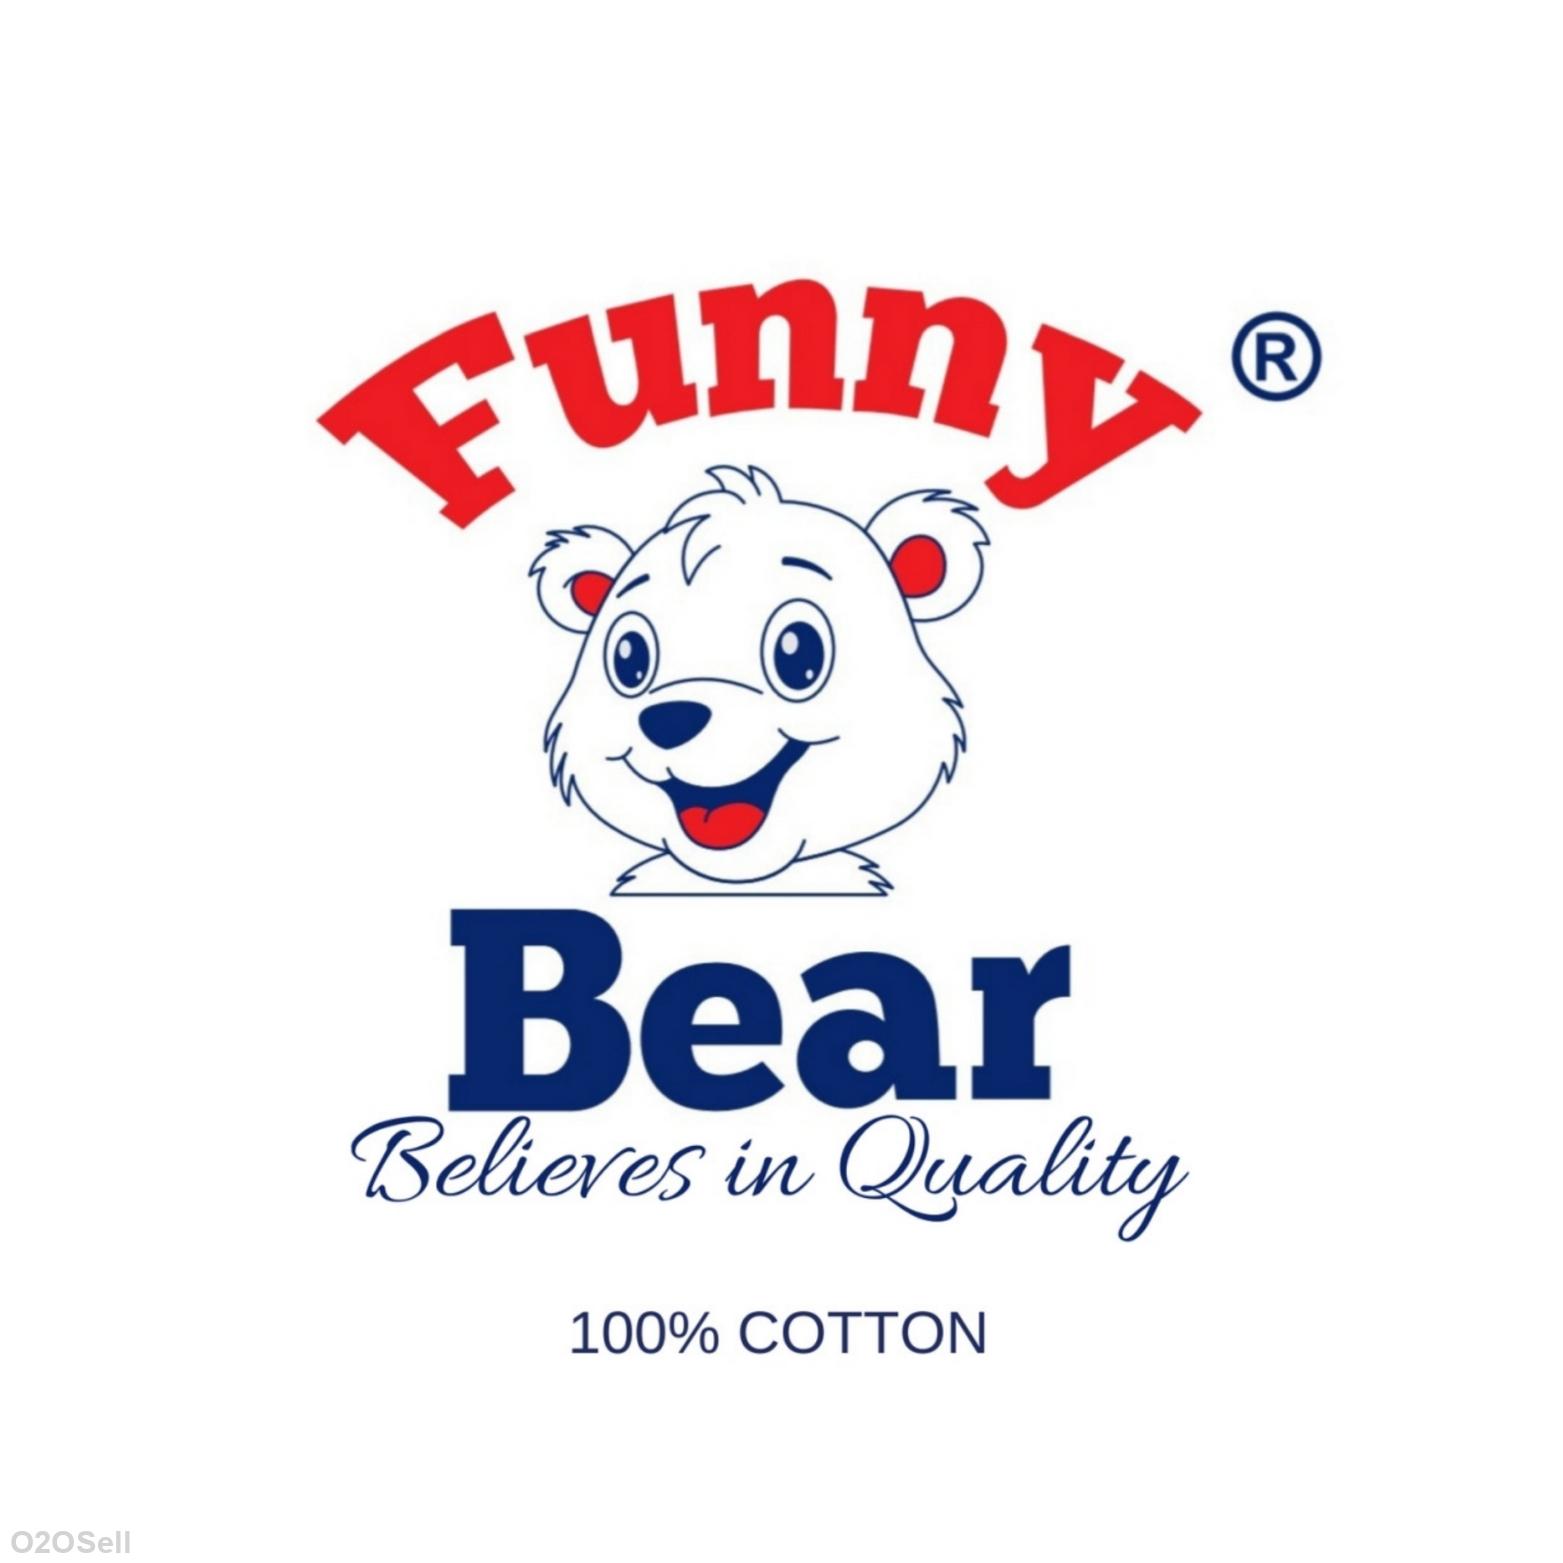 Funny Bear - Baby Clothes, Kids Clothes, Kids Wear Manufacturer in India - Profile Image